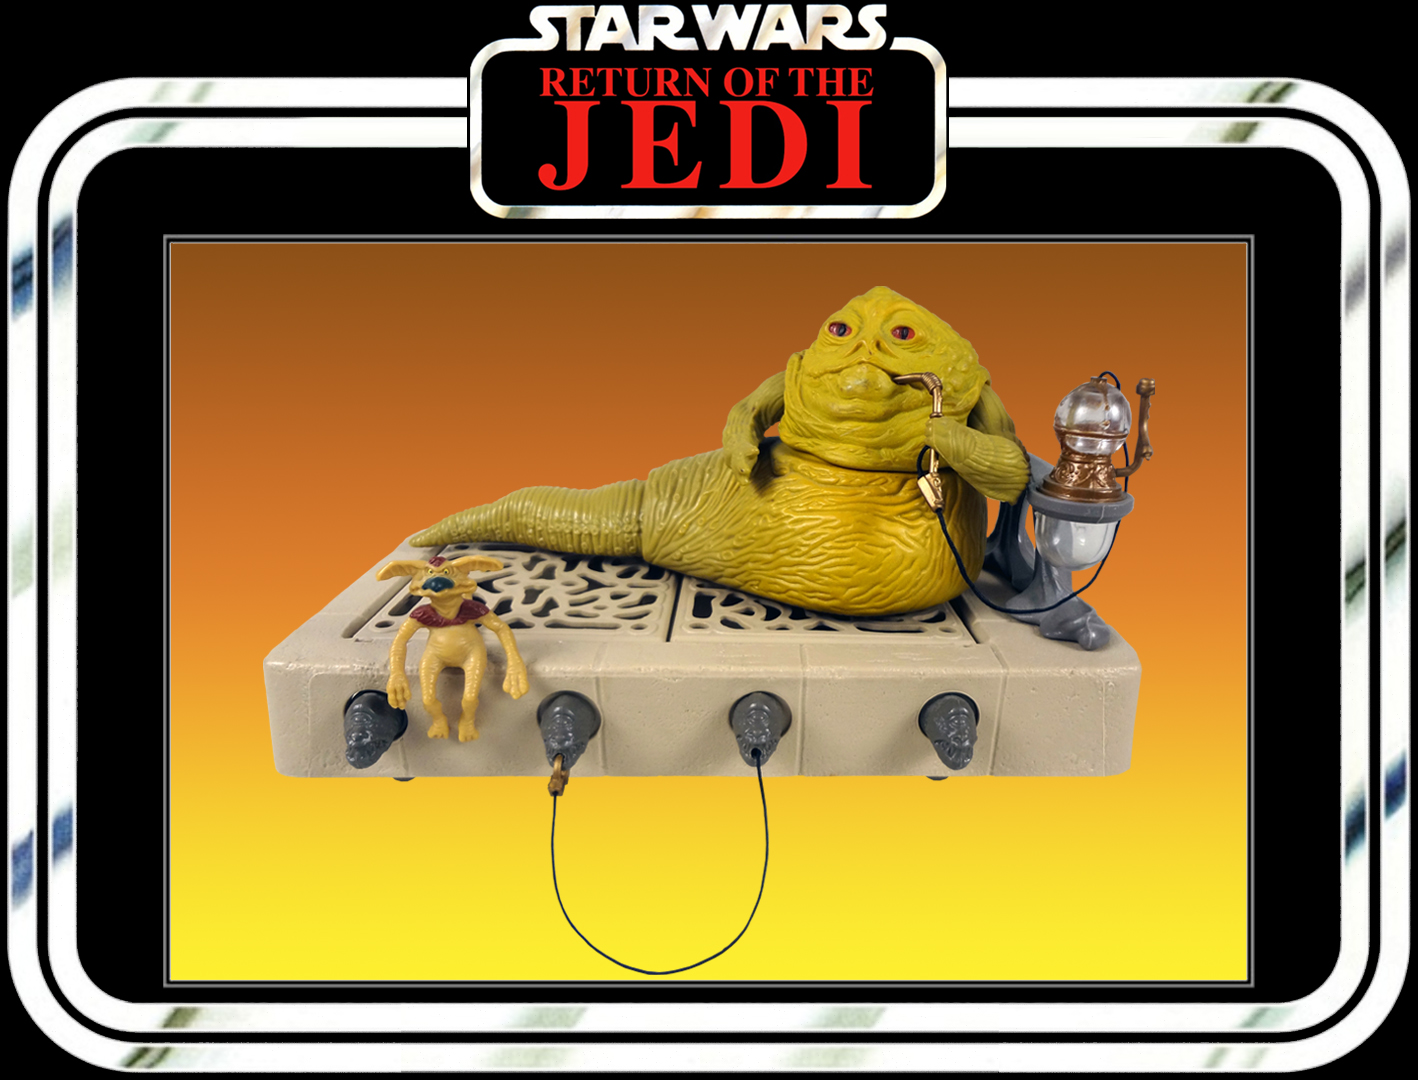 Star Wars ROTJ Jabba The Hutt Action Playset 1983 Kenner No 70490 NRFB for sale online